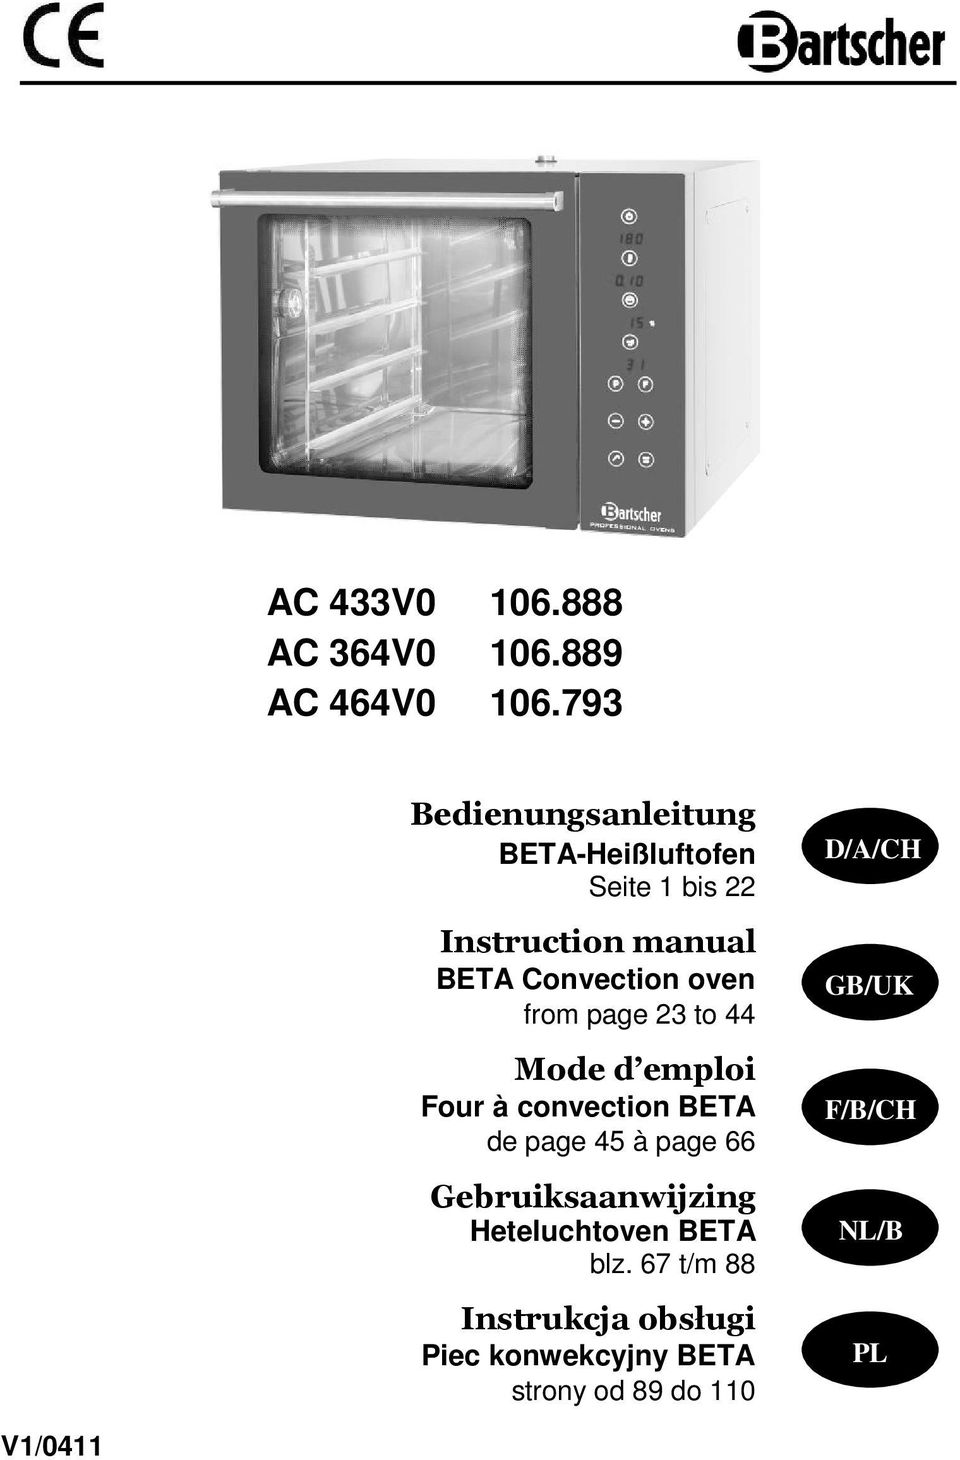 oven from page 23 to 44 Mode d emploi Four à convection BETA de page 45 à page 66